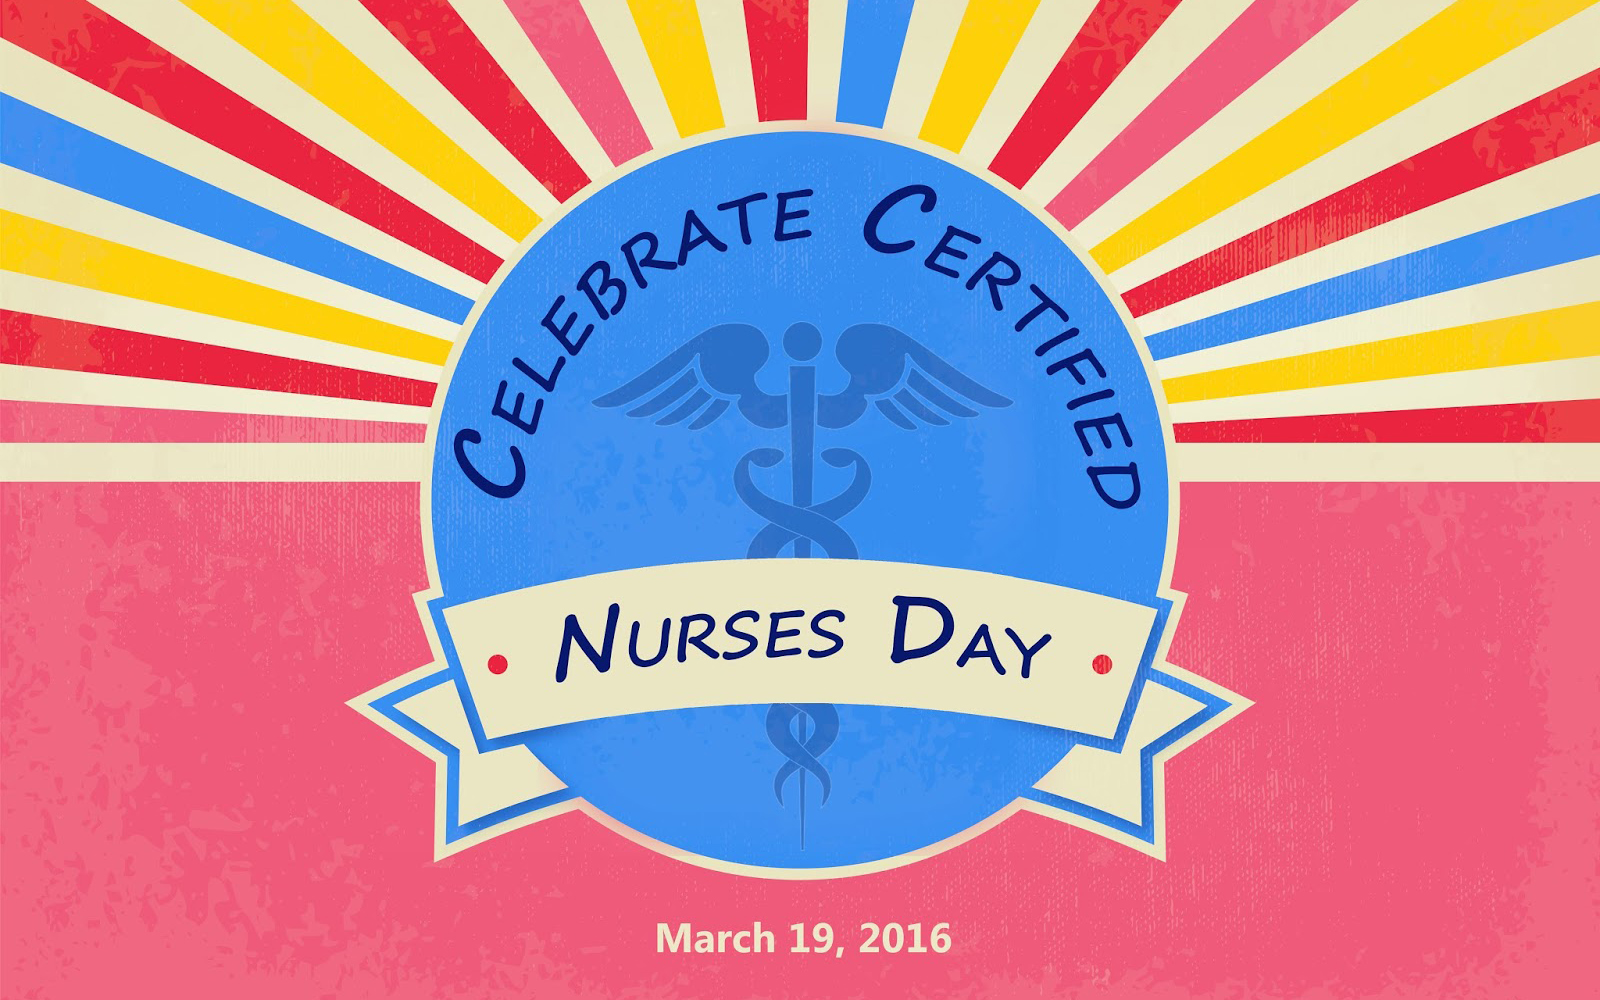 National Poultry Day / National Certified Nurses Day Ellis DownHome